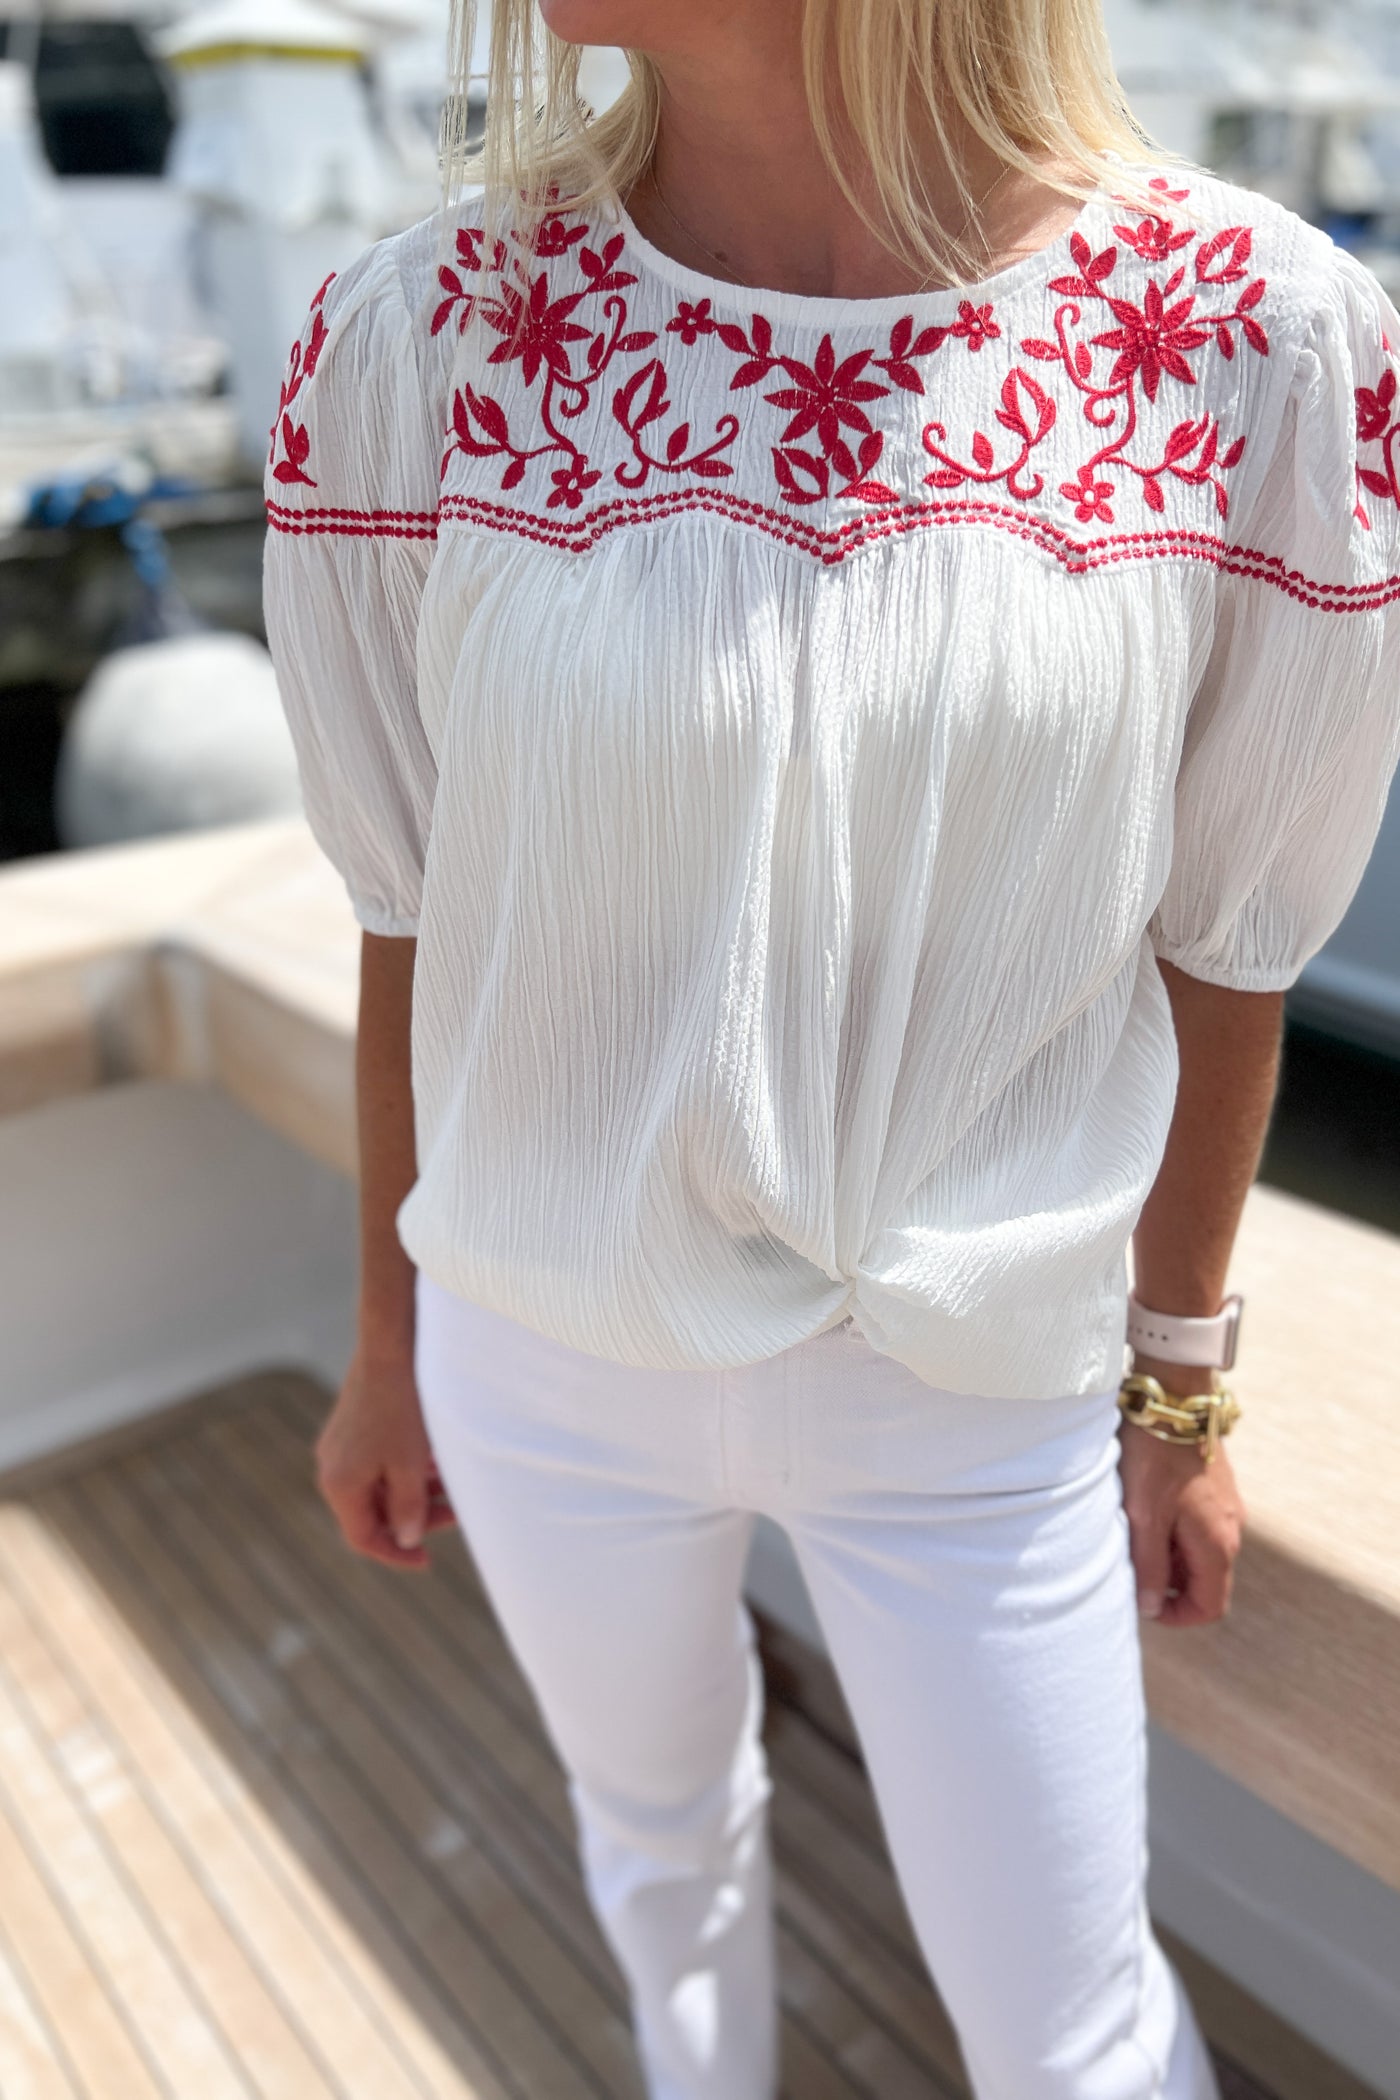 Willis embroidered top